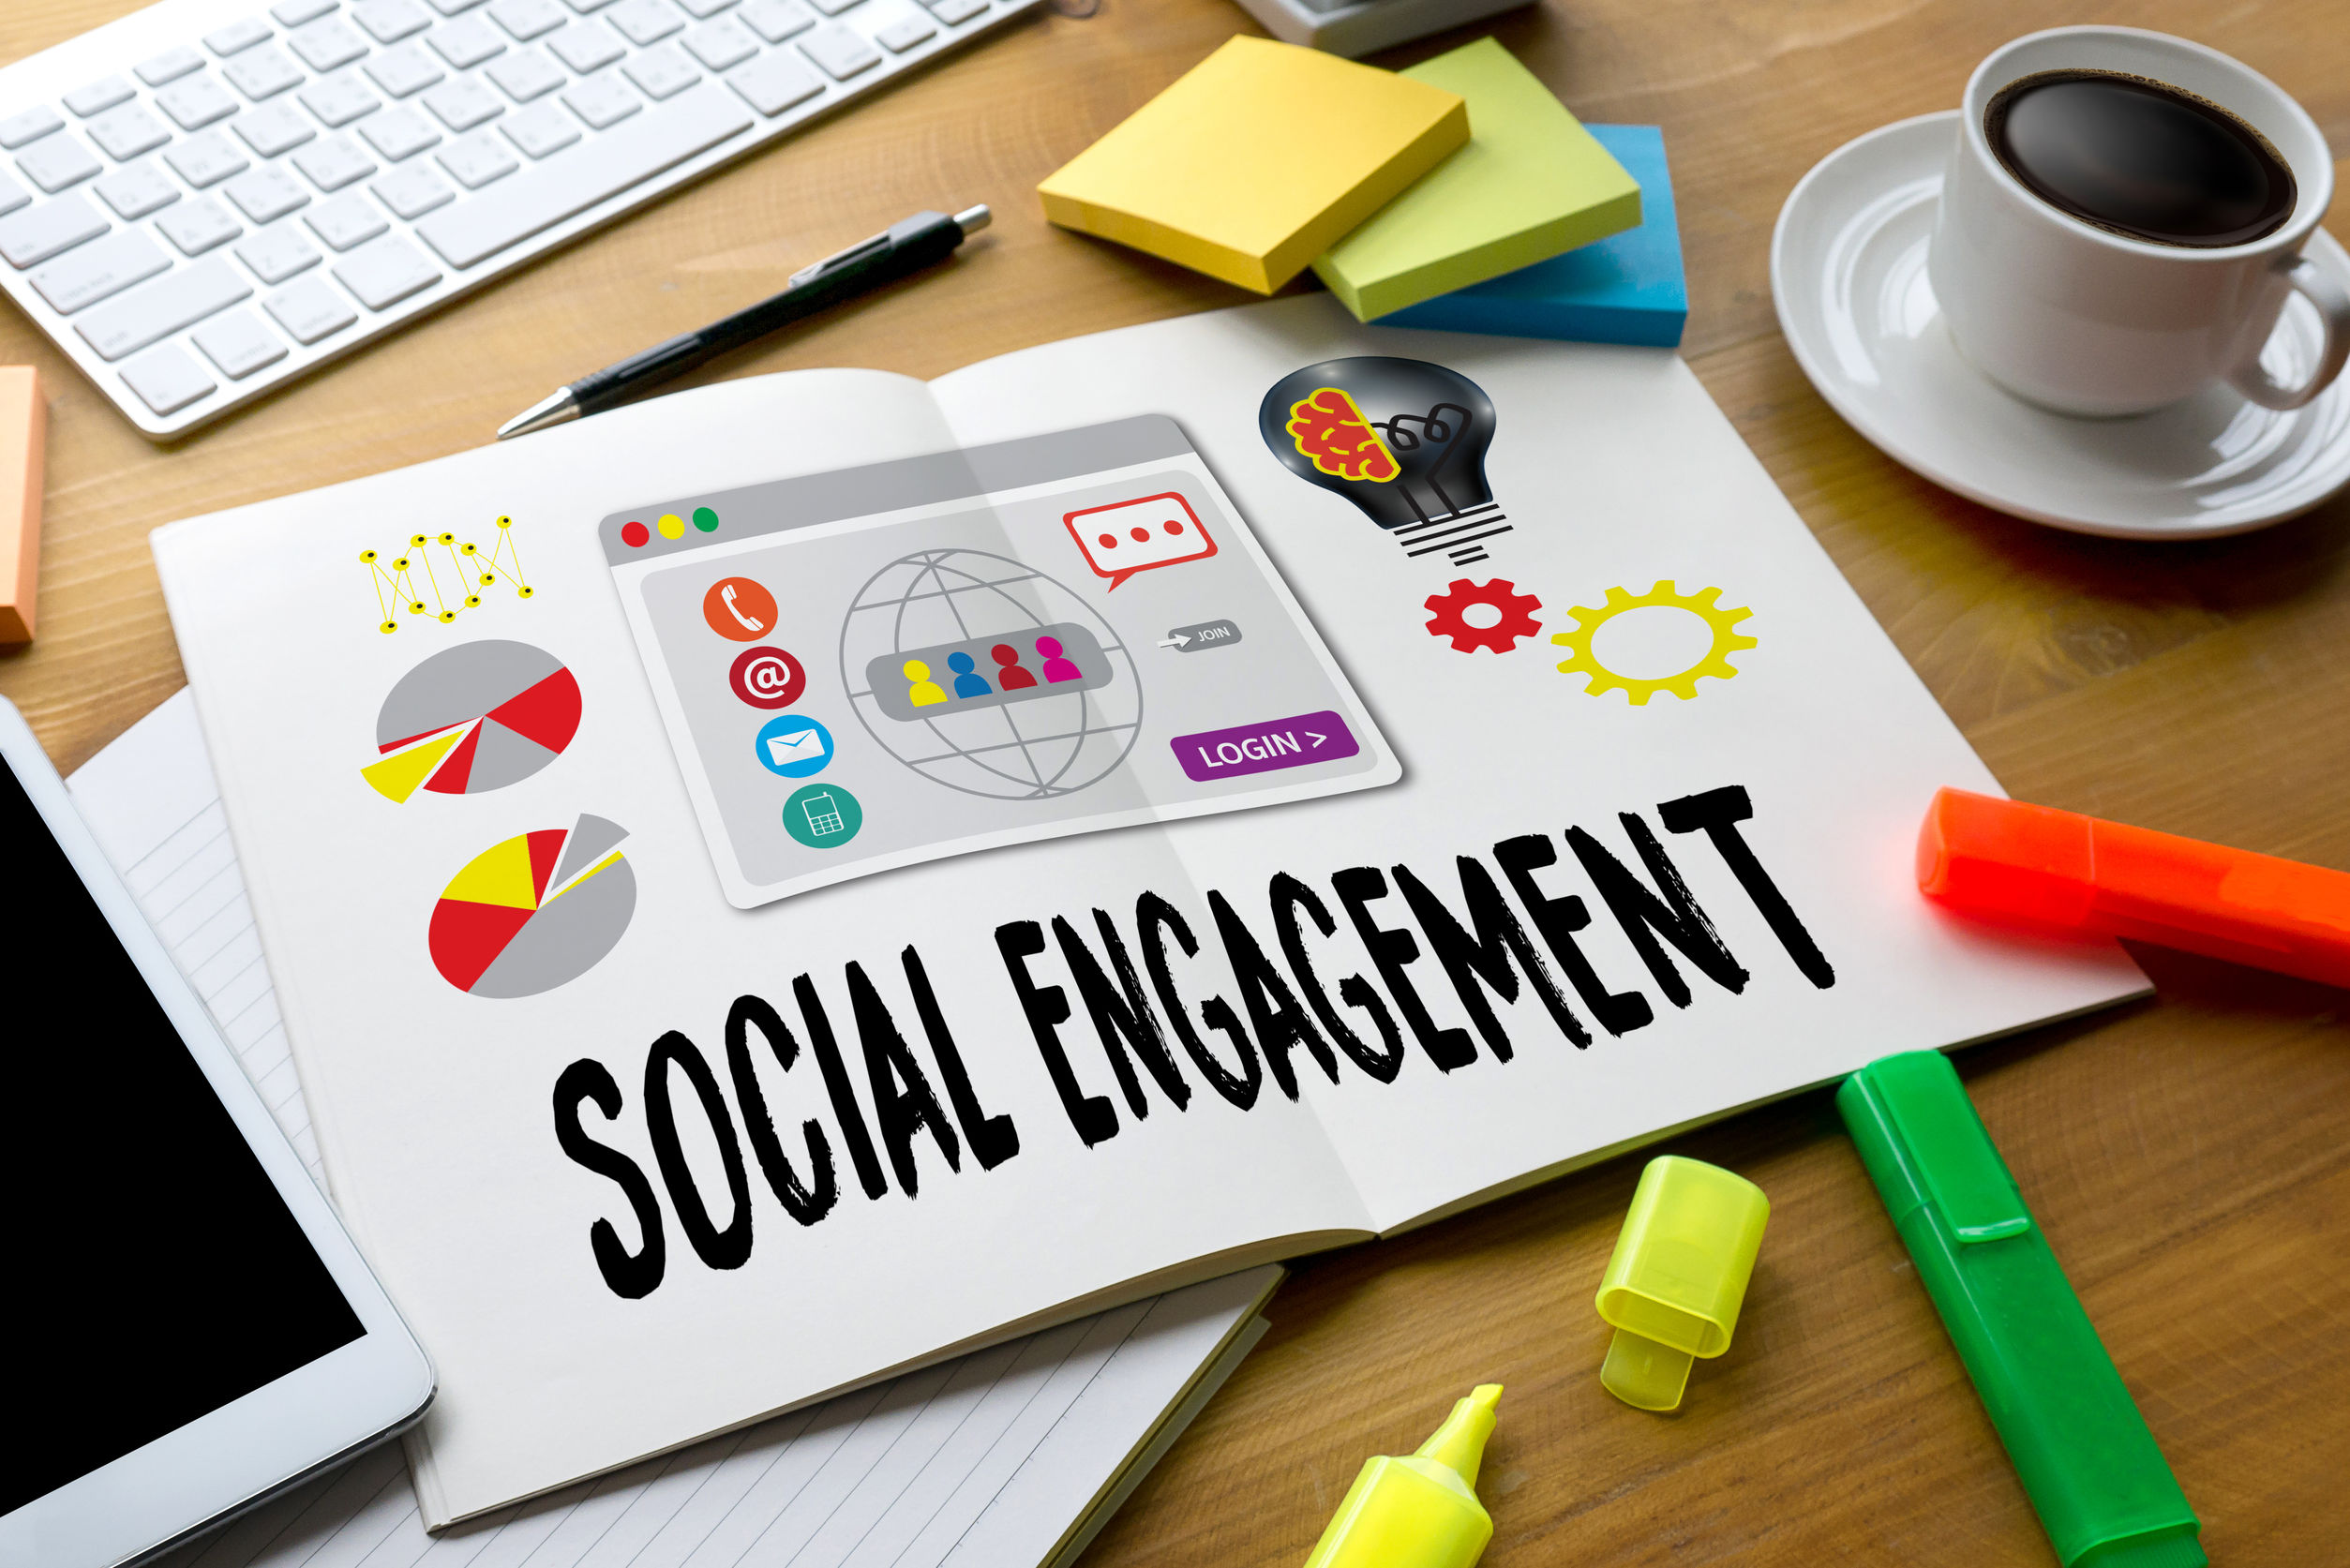 Social Engagement title and icons